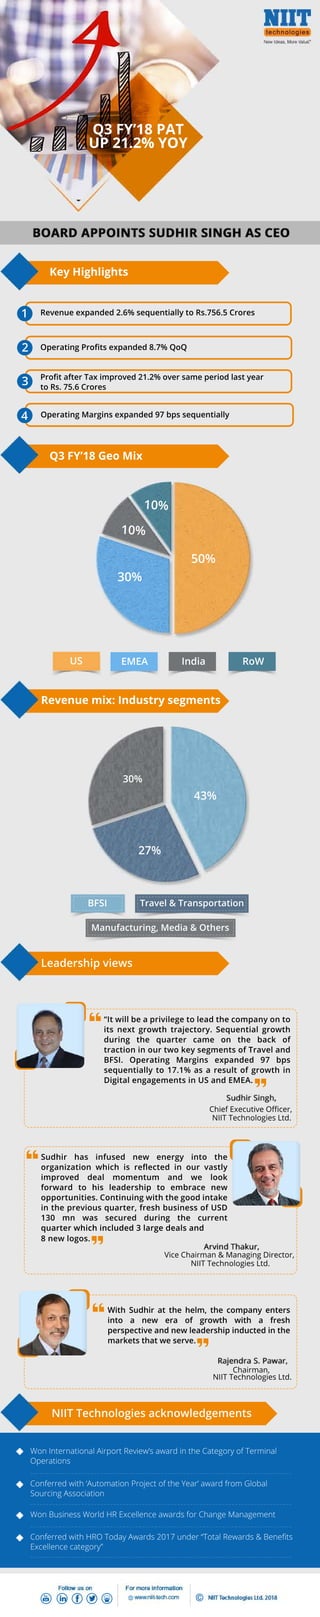 43%
27%
30%
Travel&Transportation
Manufacturing,Media&Others
BFSI
US EMEA India RoW
34%
50%
30%
10%
10%
Sudhir has infused new energy into the
organization which isreﬂected in ourvastly
improved deal momentum and we look
forward to his leadership to embrace new
opportunities.Continuingwiththegoodintake
inthepreviousquarter,freshbusinessofUSD
130 mn was secured during the current
quarterwhichincluded3largedealsandquarterwhichincluded3largedealsand
8newlogos.
ViceChairman&ManagingDirector,
NIITTechnologiesLtd.
“Itwillbeaprivilegetoleadthecompanyonto
itsnextgrowthtrajectory.Sequentialgrowth
during the quarter came on the back of
tractioninourtwokeysegmentsofTraveland
BFSI.Operating Margins expanded 97 bps
sequentiallyto17.1% asaresultofgrowthin
DigitalengagementsinUSandEMEA.
ChiefExecutiveOﬃcer,
NIITTechnologiesLtd.
WithSudhiratthehelm,thecompanyenters
into a new era of growth with a fresh
perspectiveandnewleadershipinductedinthe
marketsthatweserve.
Chairman,
NIITTechnologiesLtd.
WonInternationalAirportReview’sawardintheCategoryofTerminal
Operations
Conferredwith‘AutomationProjectoftheYear’awardfromGlobal
SourcingAssociation
WonBusinessWorldHRExcellenceawardsforChangeManagement
ConferredwithHROTodayAwards2017under“TotalRewards&Beneﬁts
Excellencecategory”
2
3
4
1
OperatingProﬁtsexpanded8.7%QoQ
Revenueexpanded2.6%sequentiallytoRs.756.5Crores
ProﬁtafterTaximproved21.2%oversameperiodlastyear
toRs.75.6Crores
OperatingMarginsexpanded97bpssequentially
KeyHighlights
Q3FY’18GeoMix
Revenuemix:Industrysegments
Leadershipviews
Q3FY’18PAT
UP21.2% YOY
NIITTechnologiesacknowledgements
 